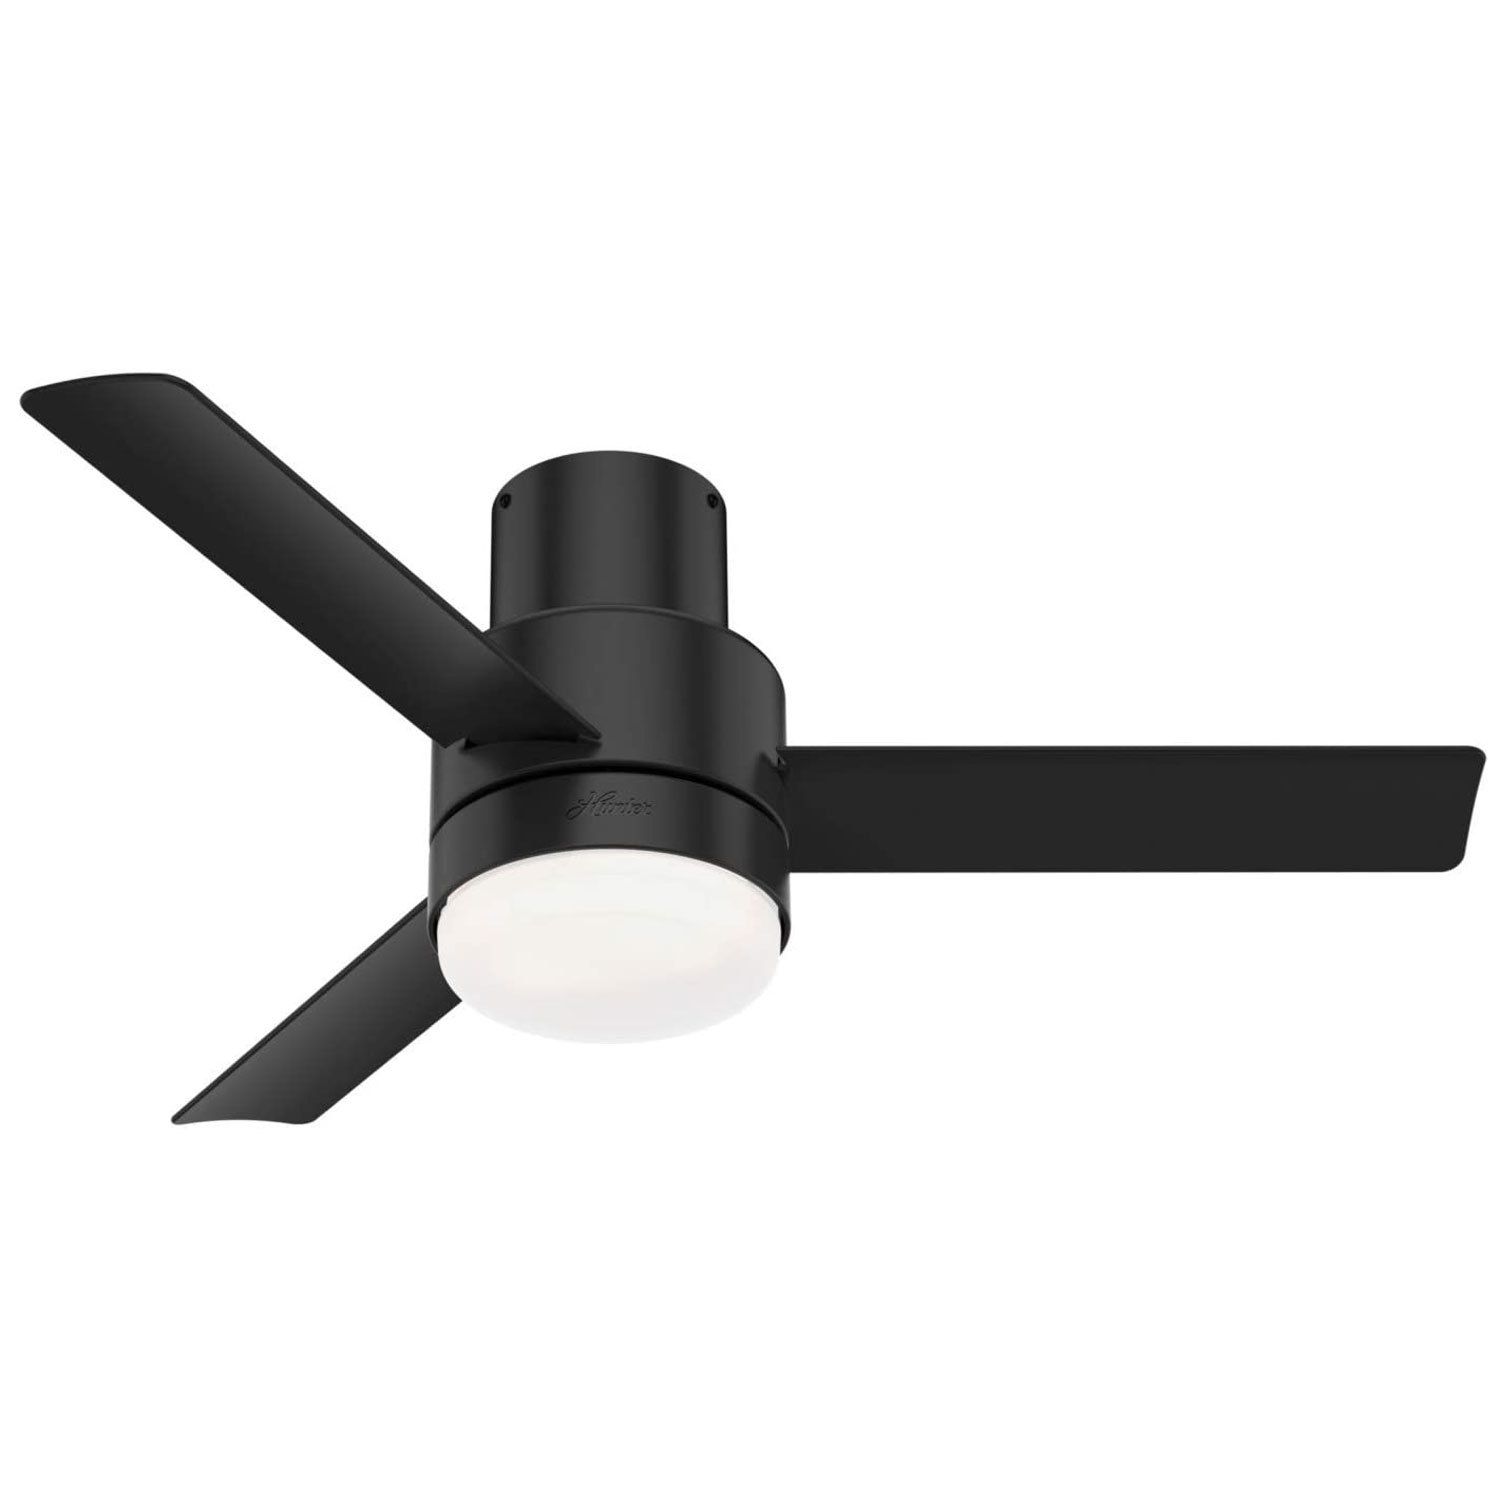 Image for Hunter Fan Company Gilmour 44 Inch Indoor Outdoor Ceiling Fan, Matte Black at Kohl's.